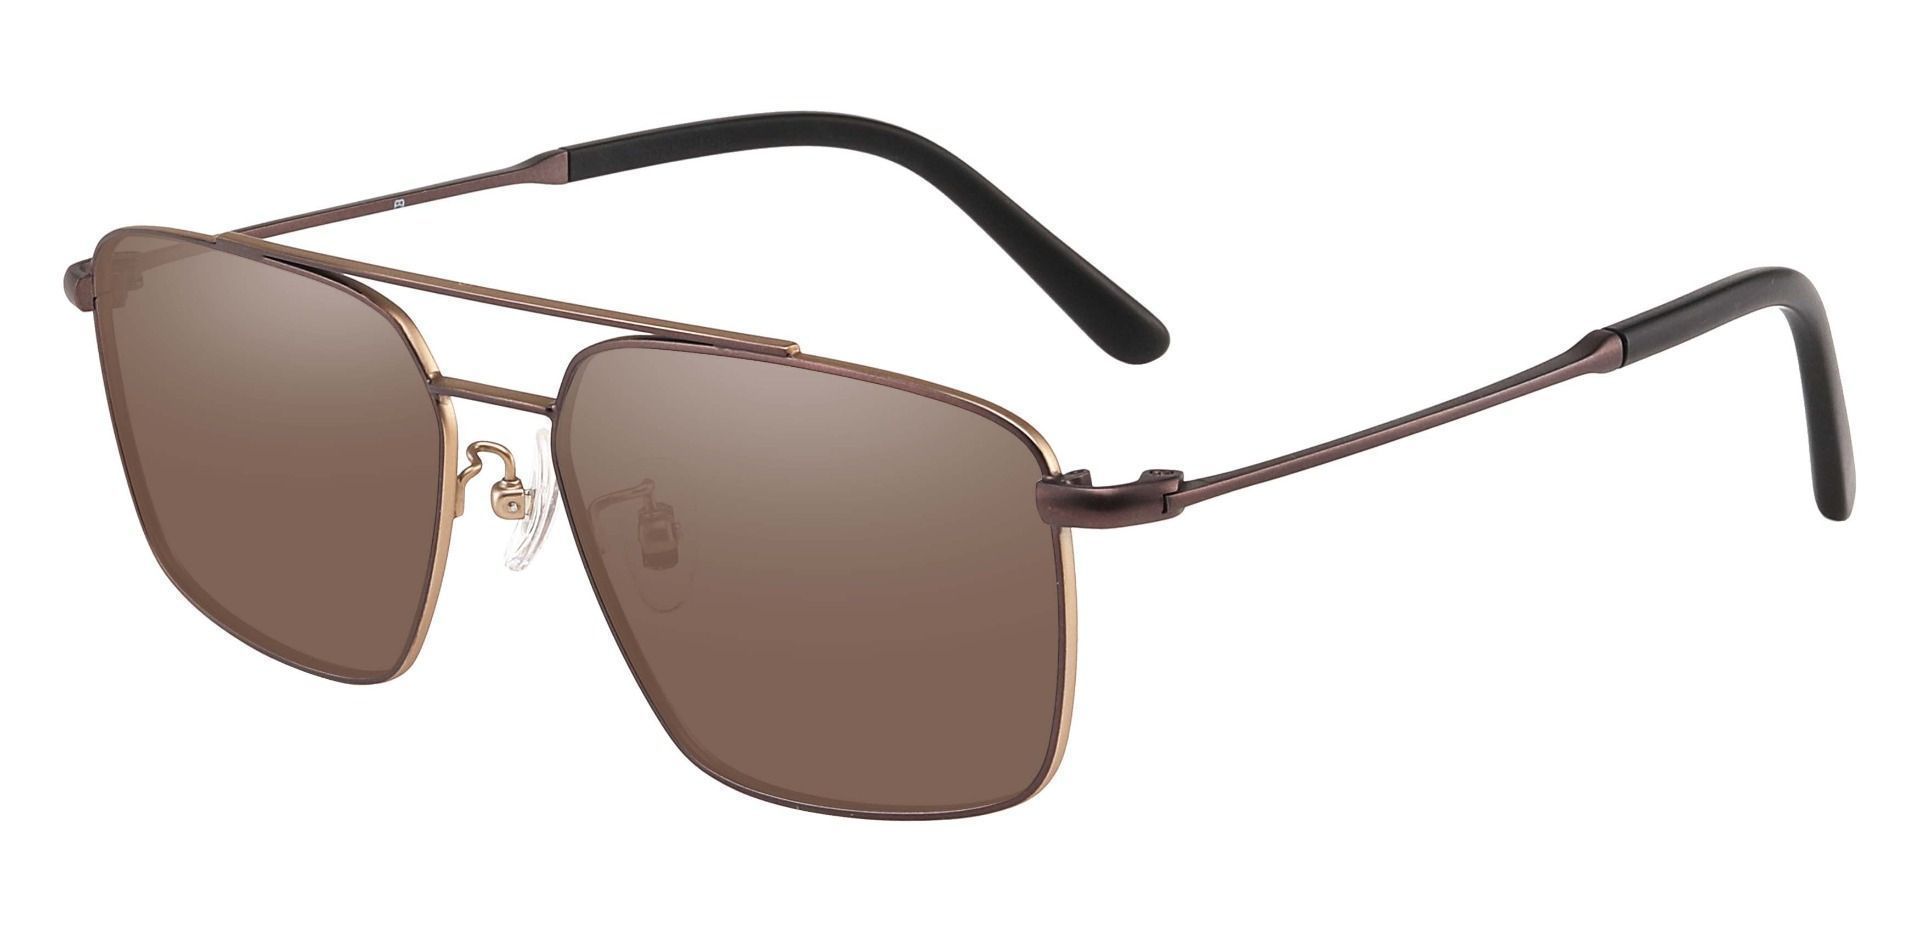 Barlow Aviator Non-Rx Sunglasses - Brown Frame With Brown Lenses